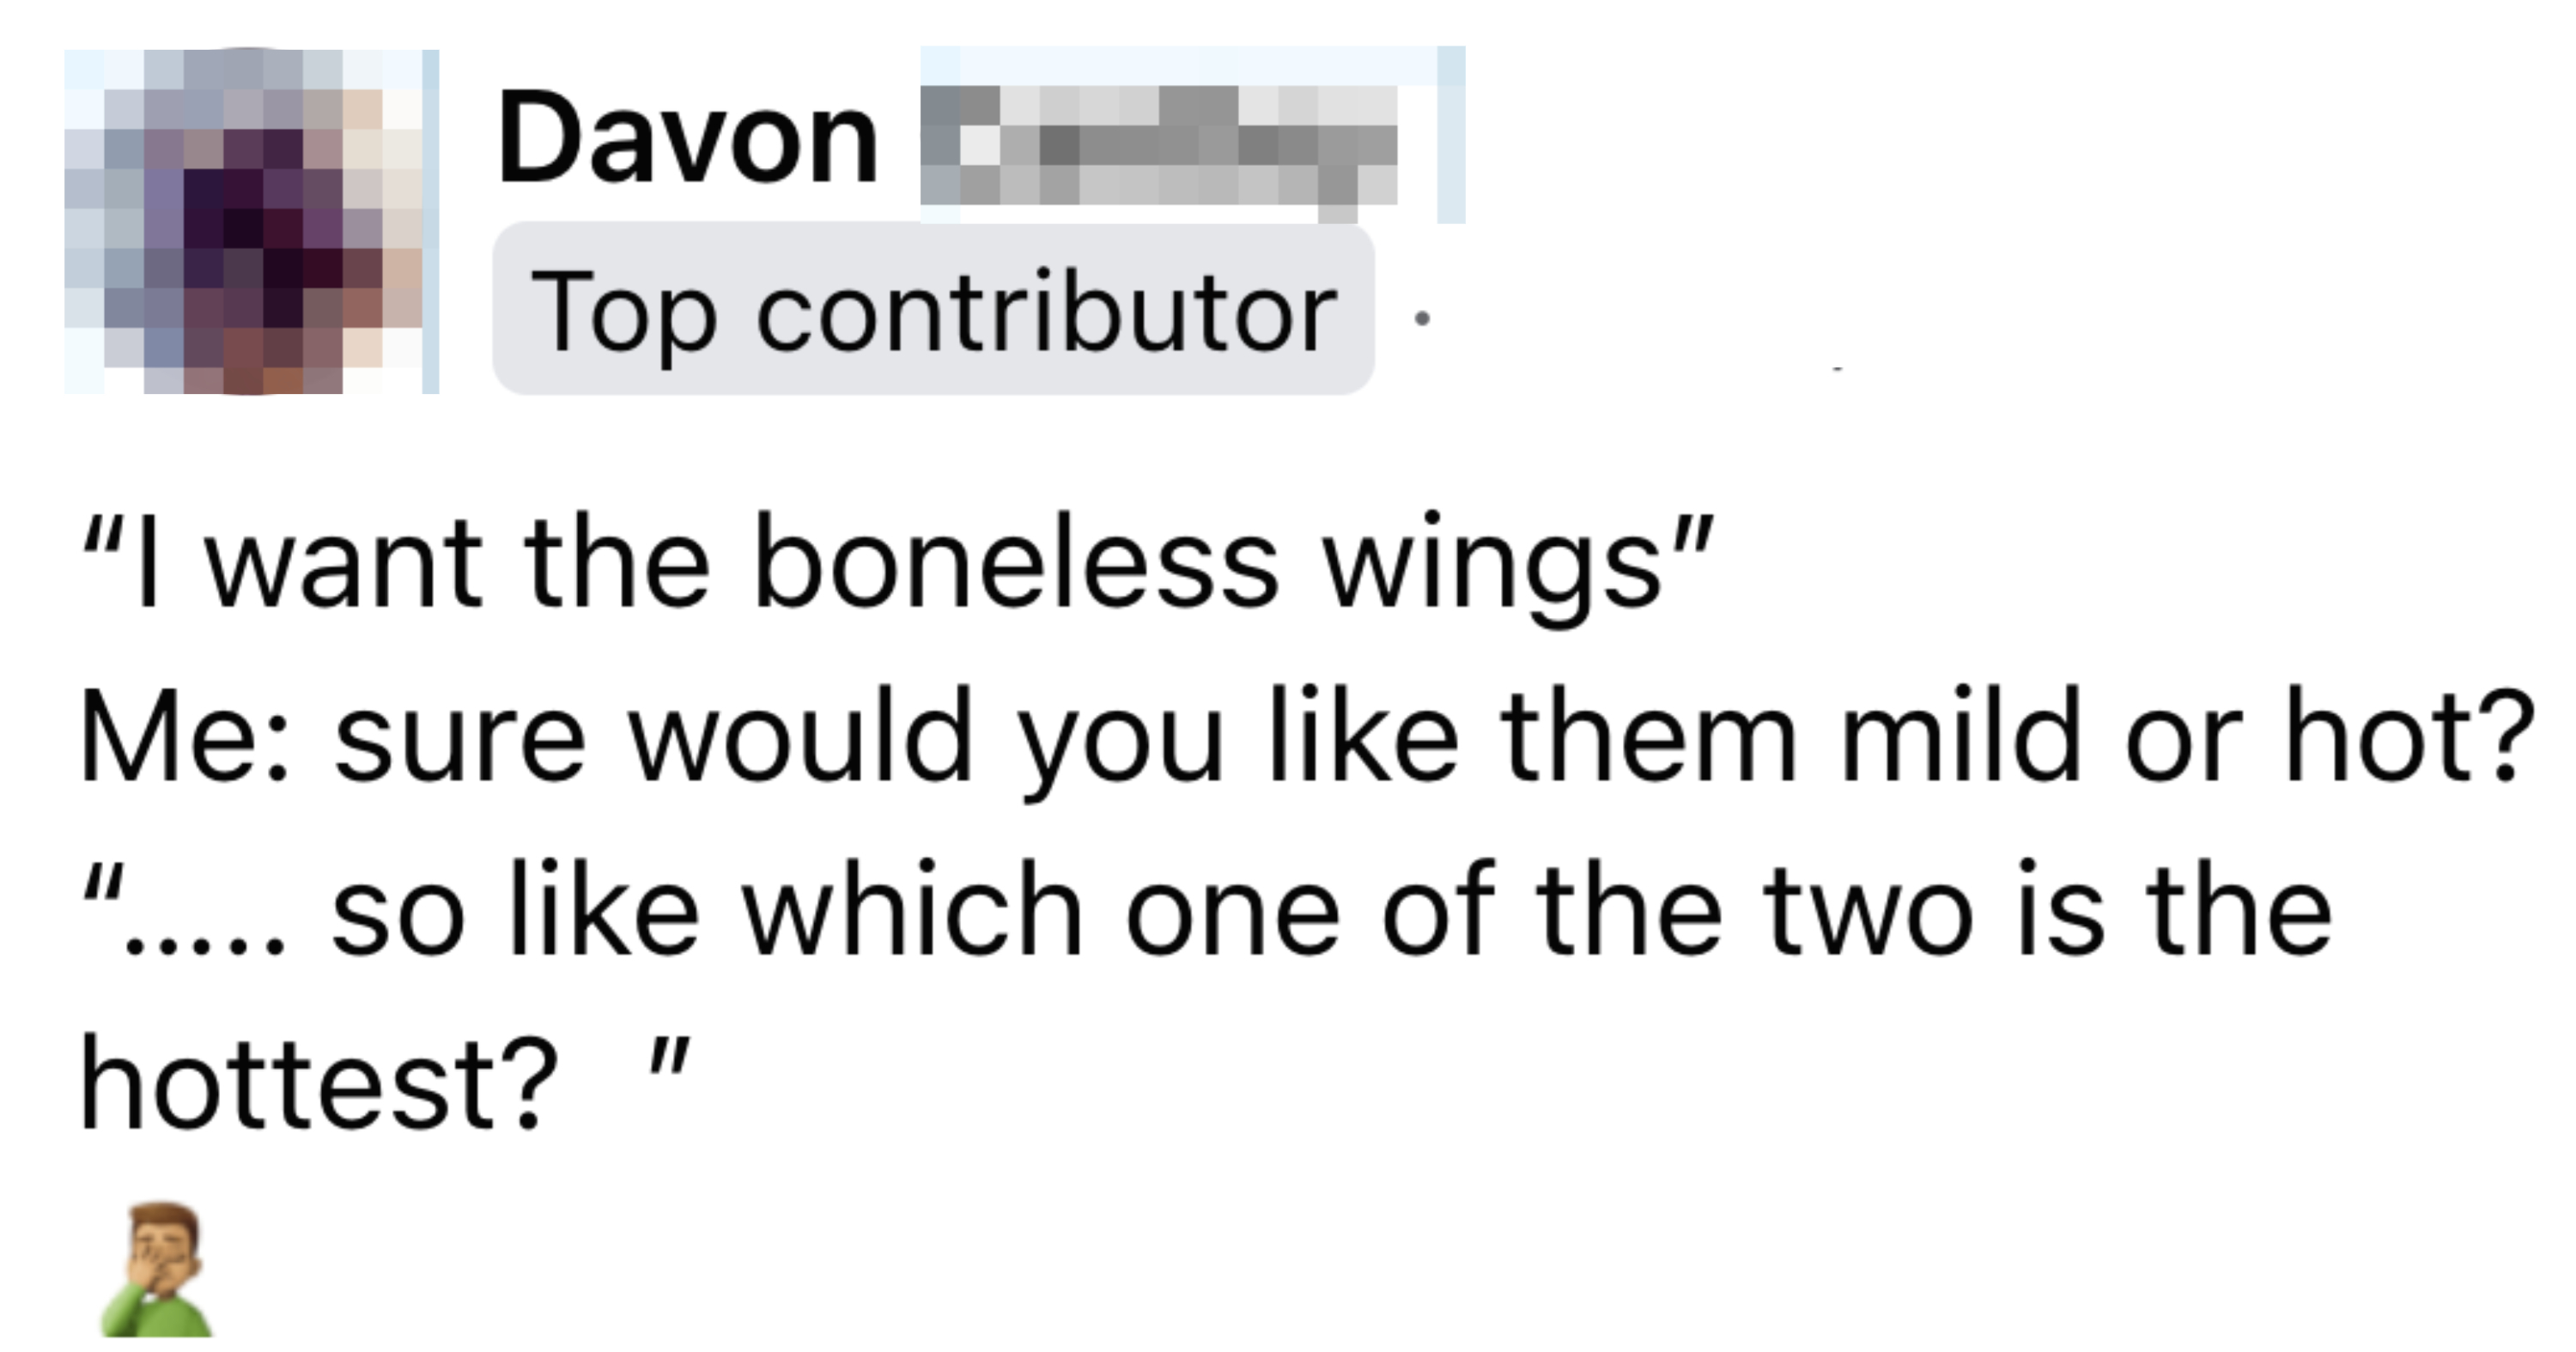 Screenshot of a social media post discussing a humorous exchange about the temperature of boneless wings